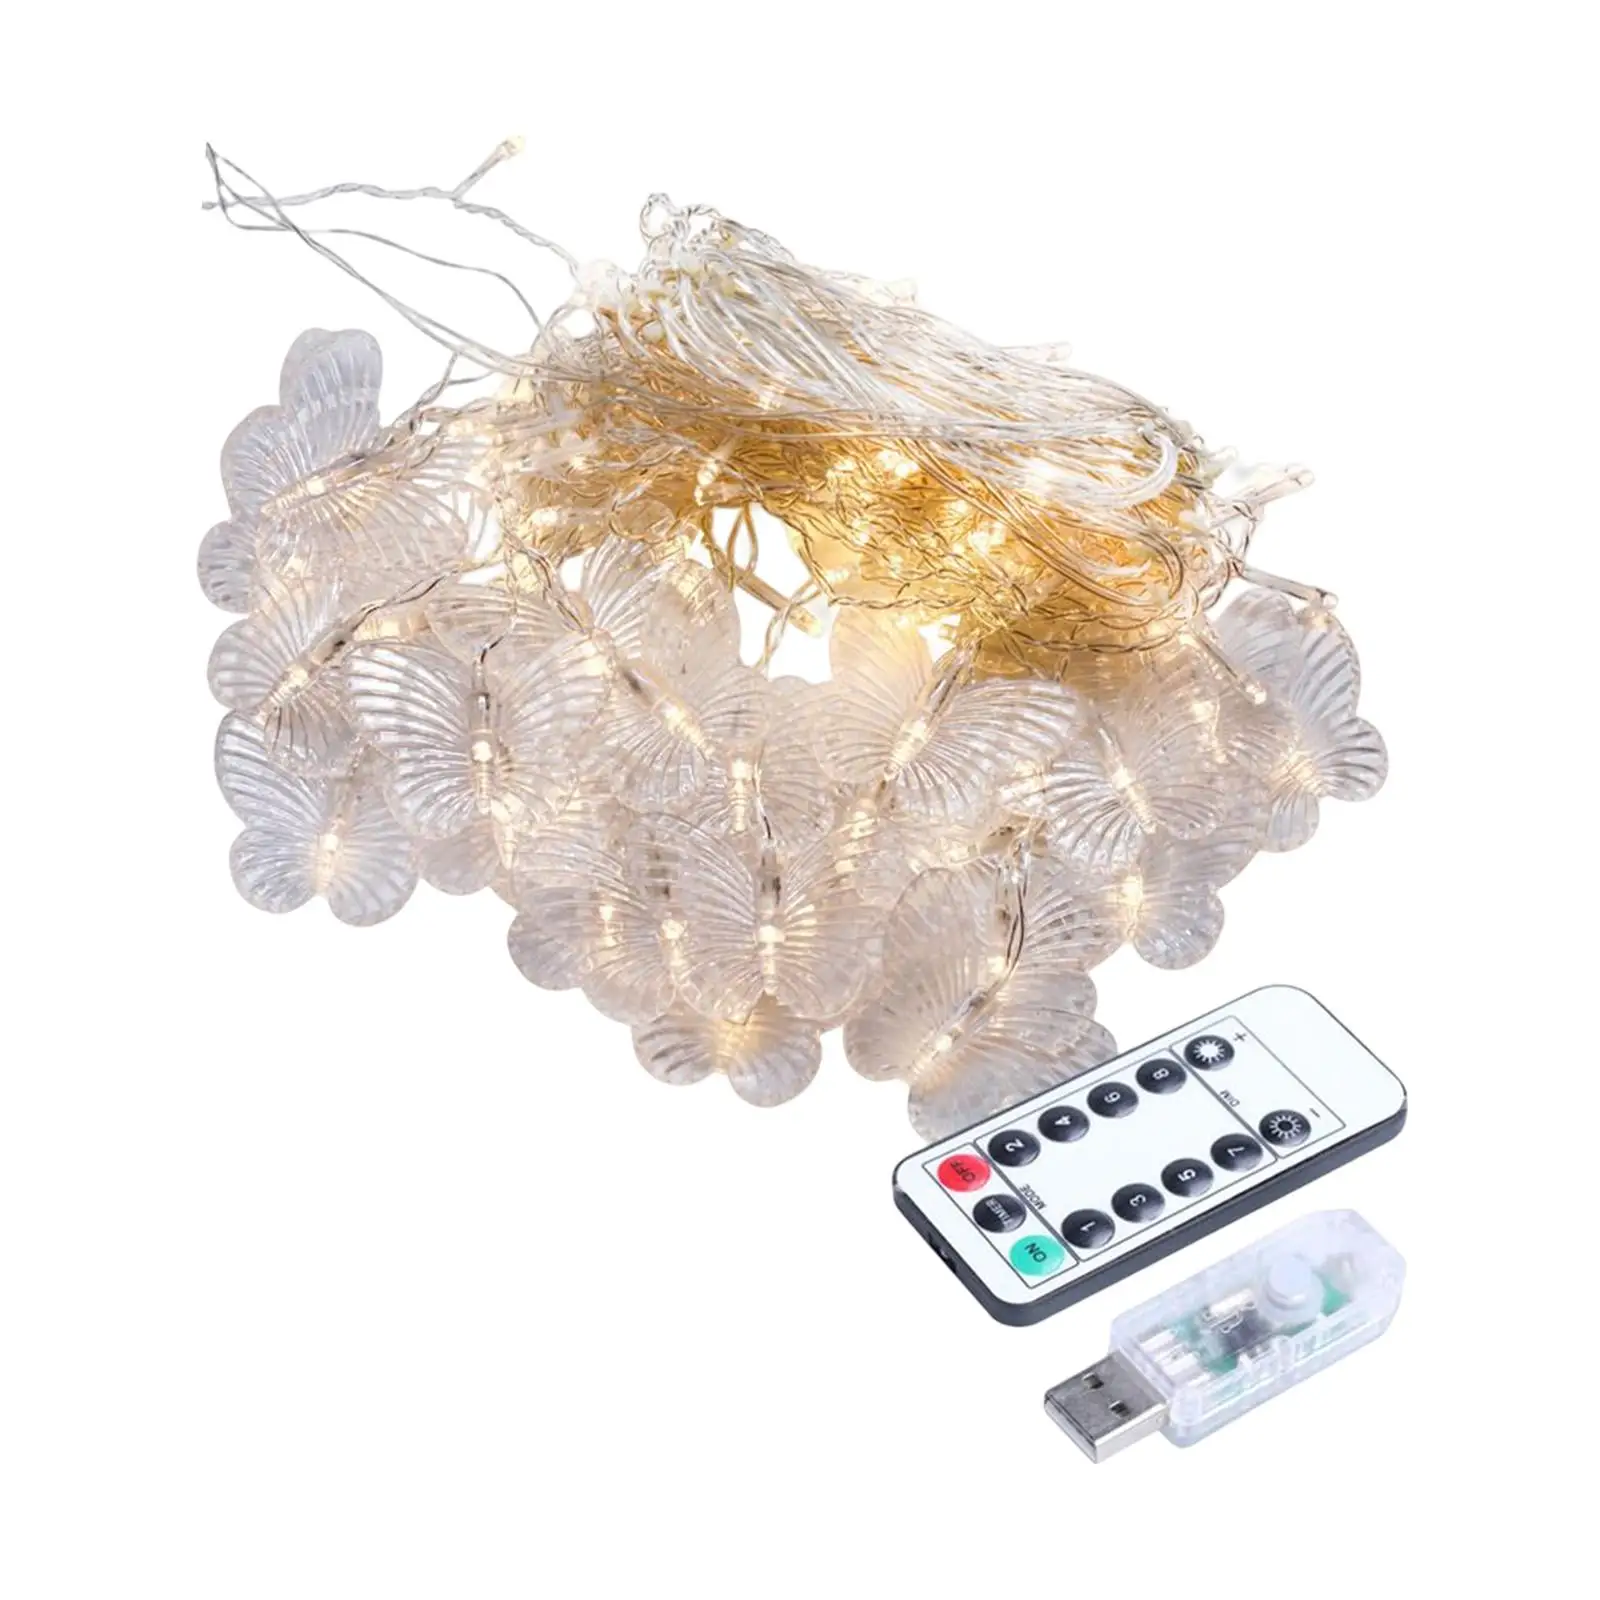 Butterfly Twinkle Lights Fairy String Lights Remote Control LED Butterfly Icicle Light for Party festival Decor